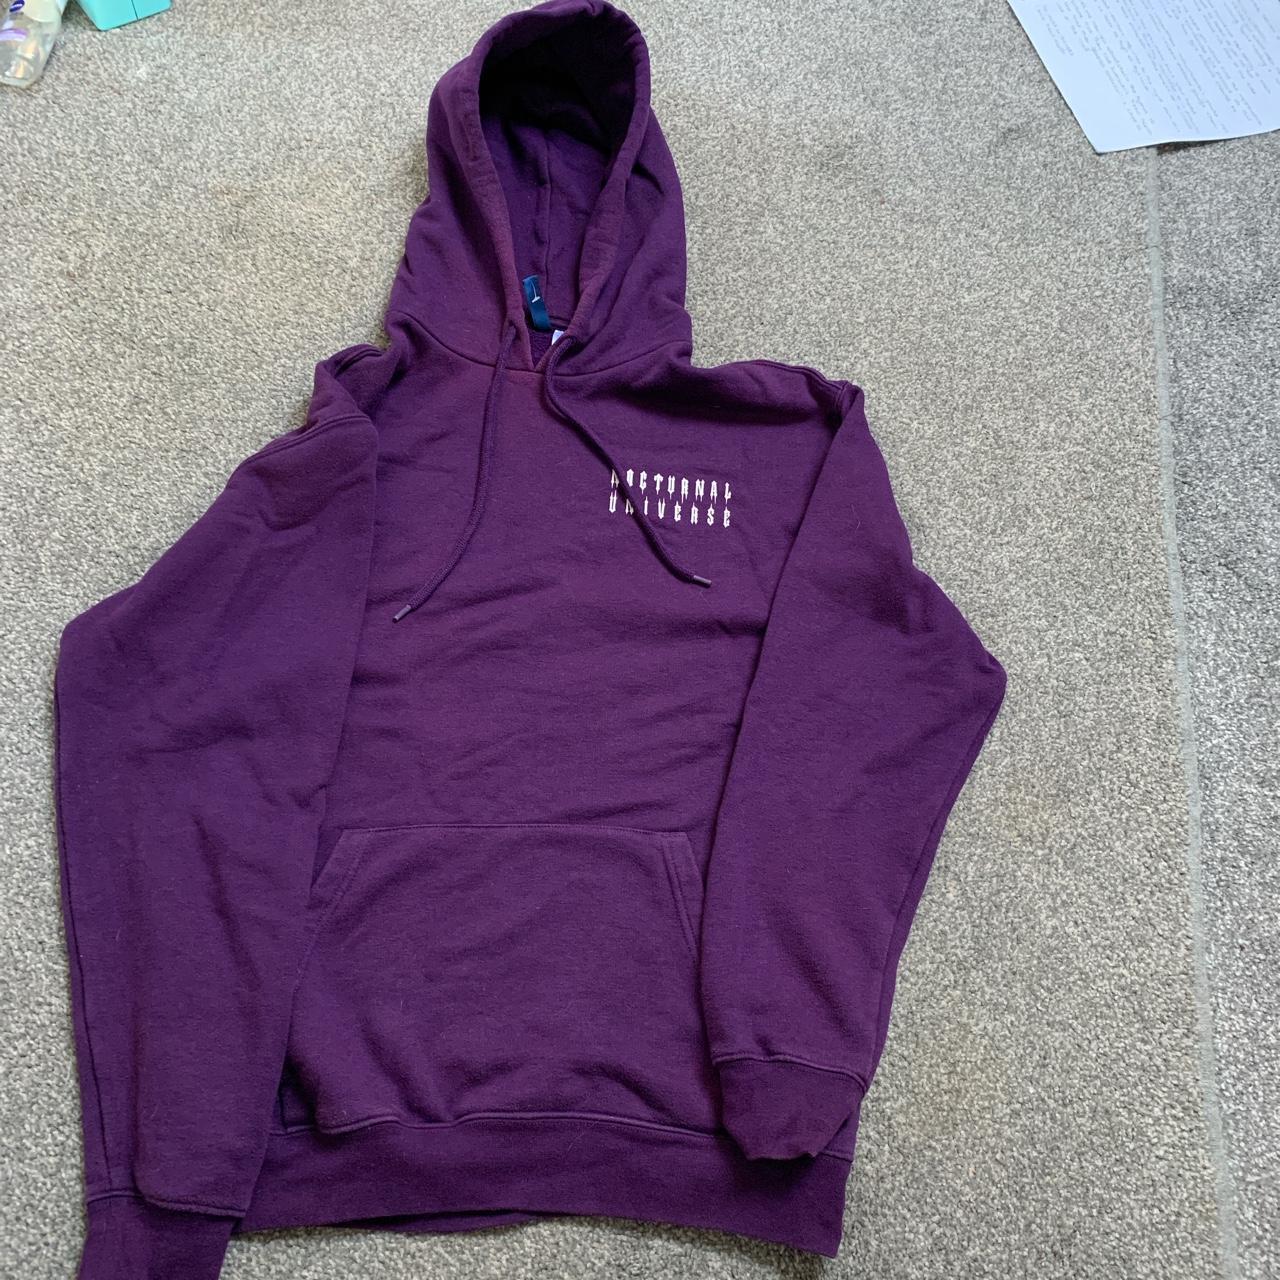 dark purple hoodie with white writing bought from... - Depop